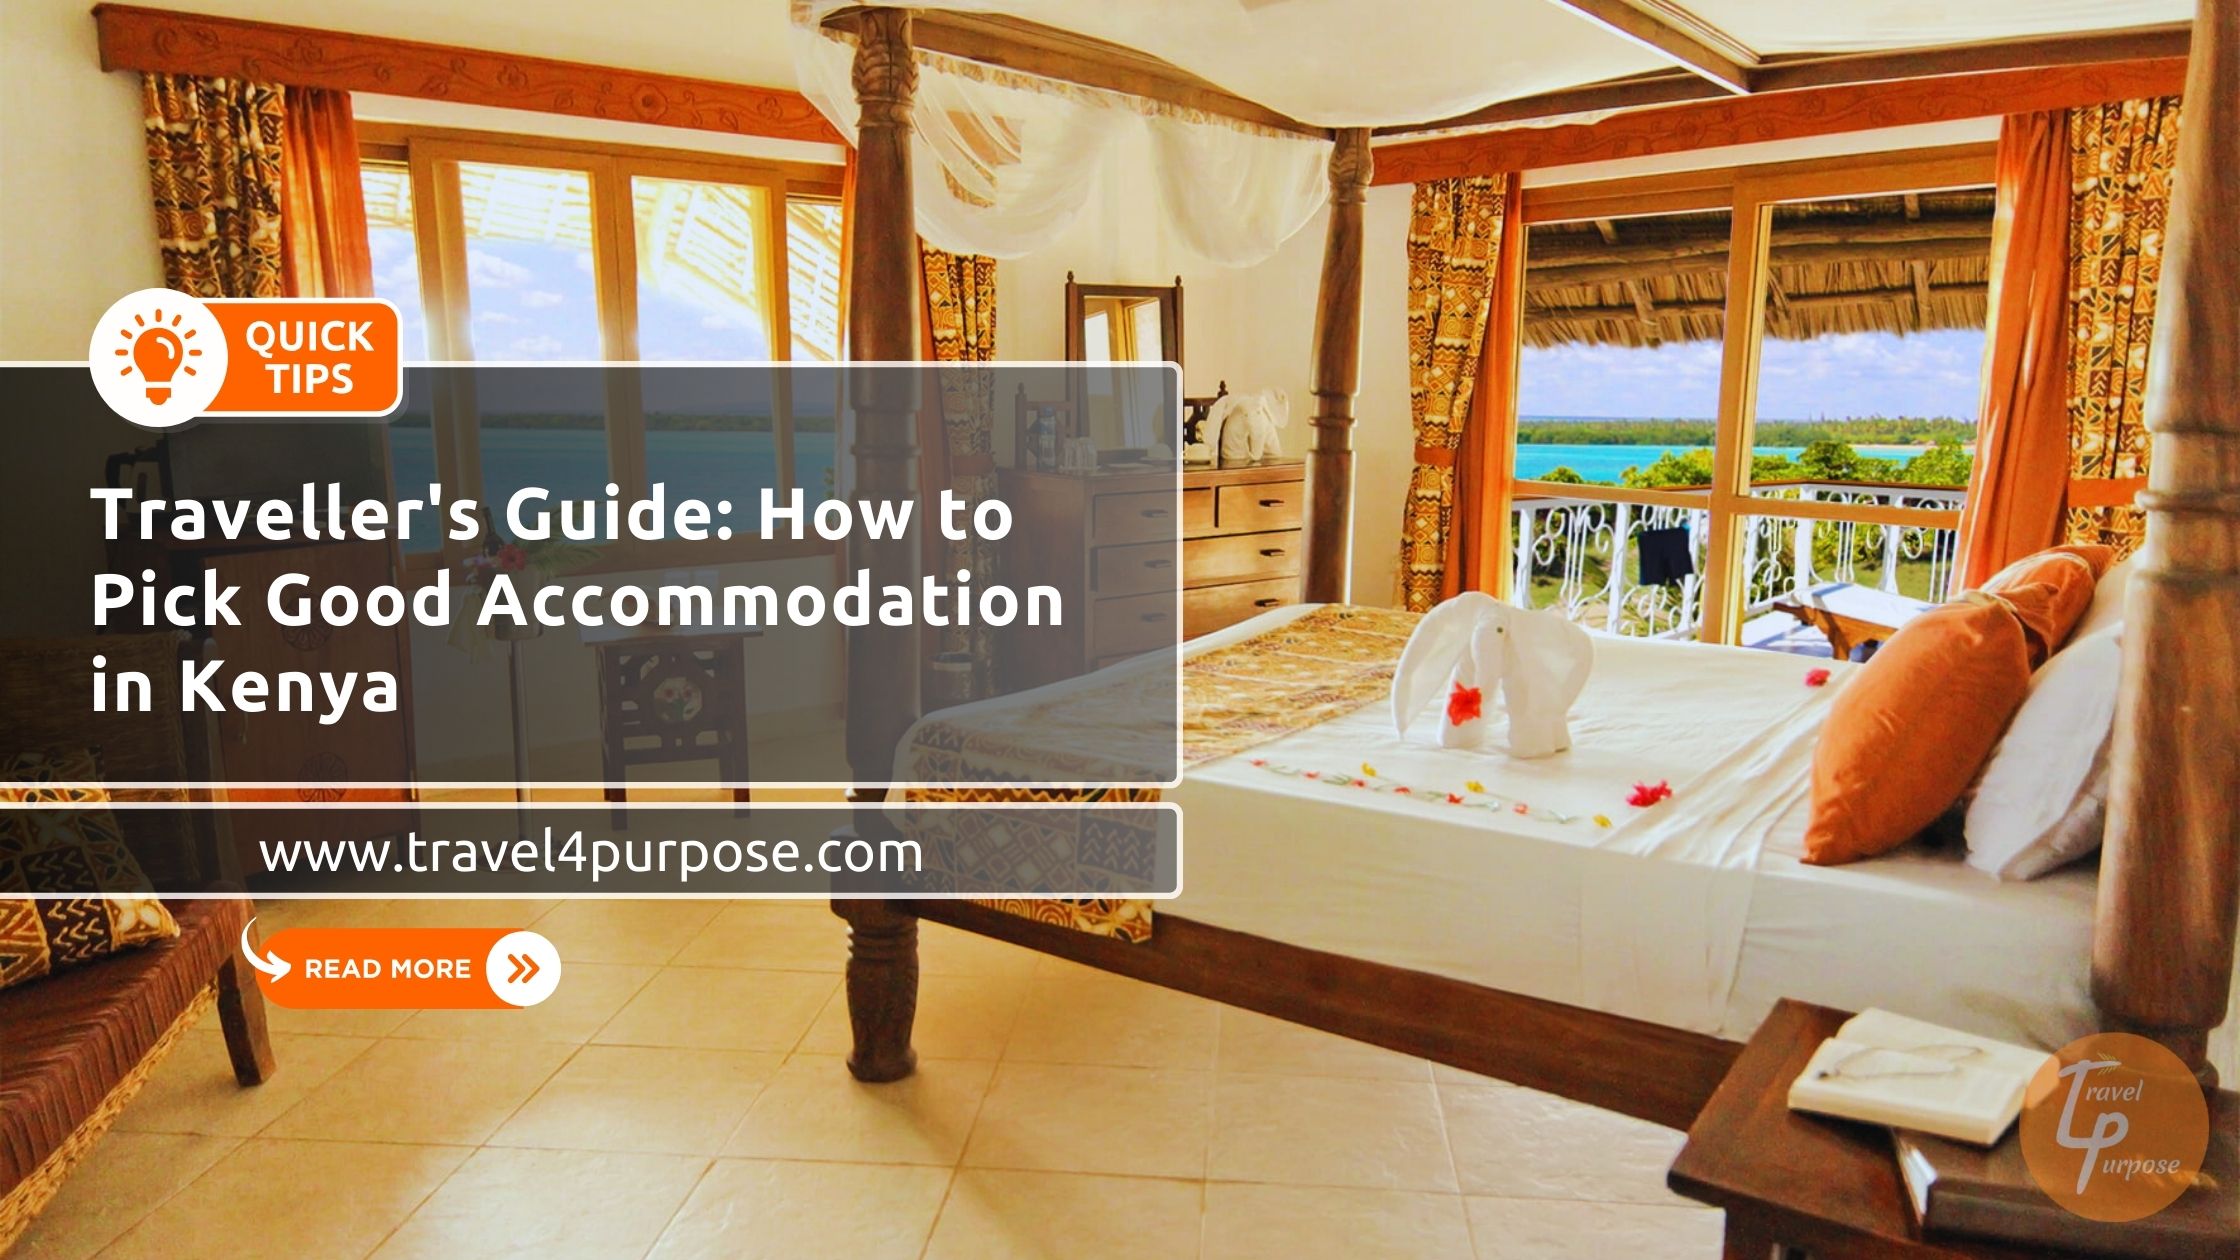 Traveller's Guide: How to Pick Good Accommodation in Kenya